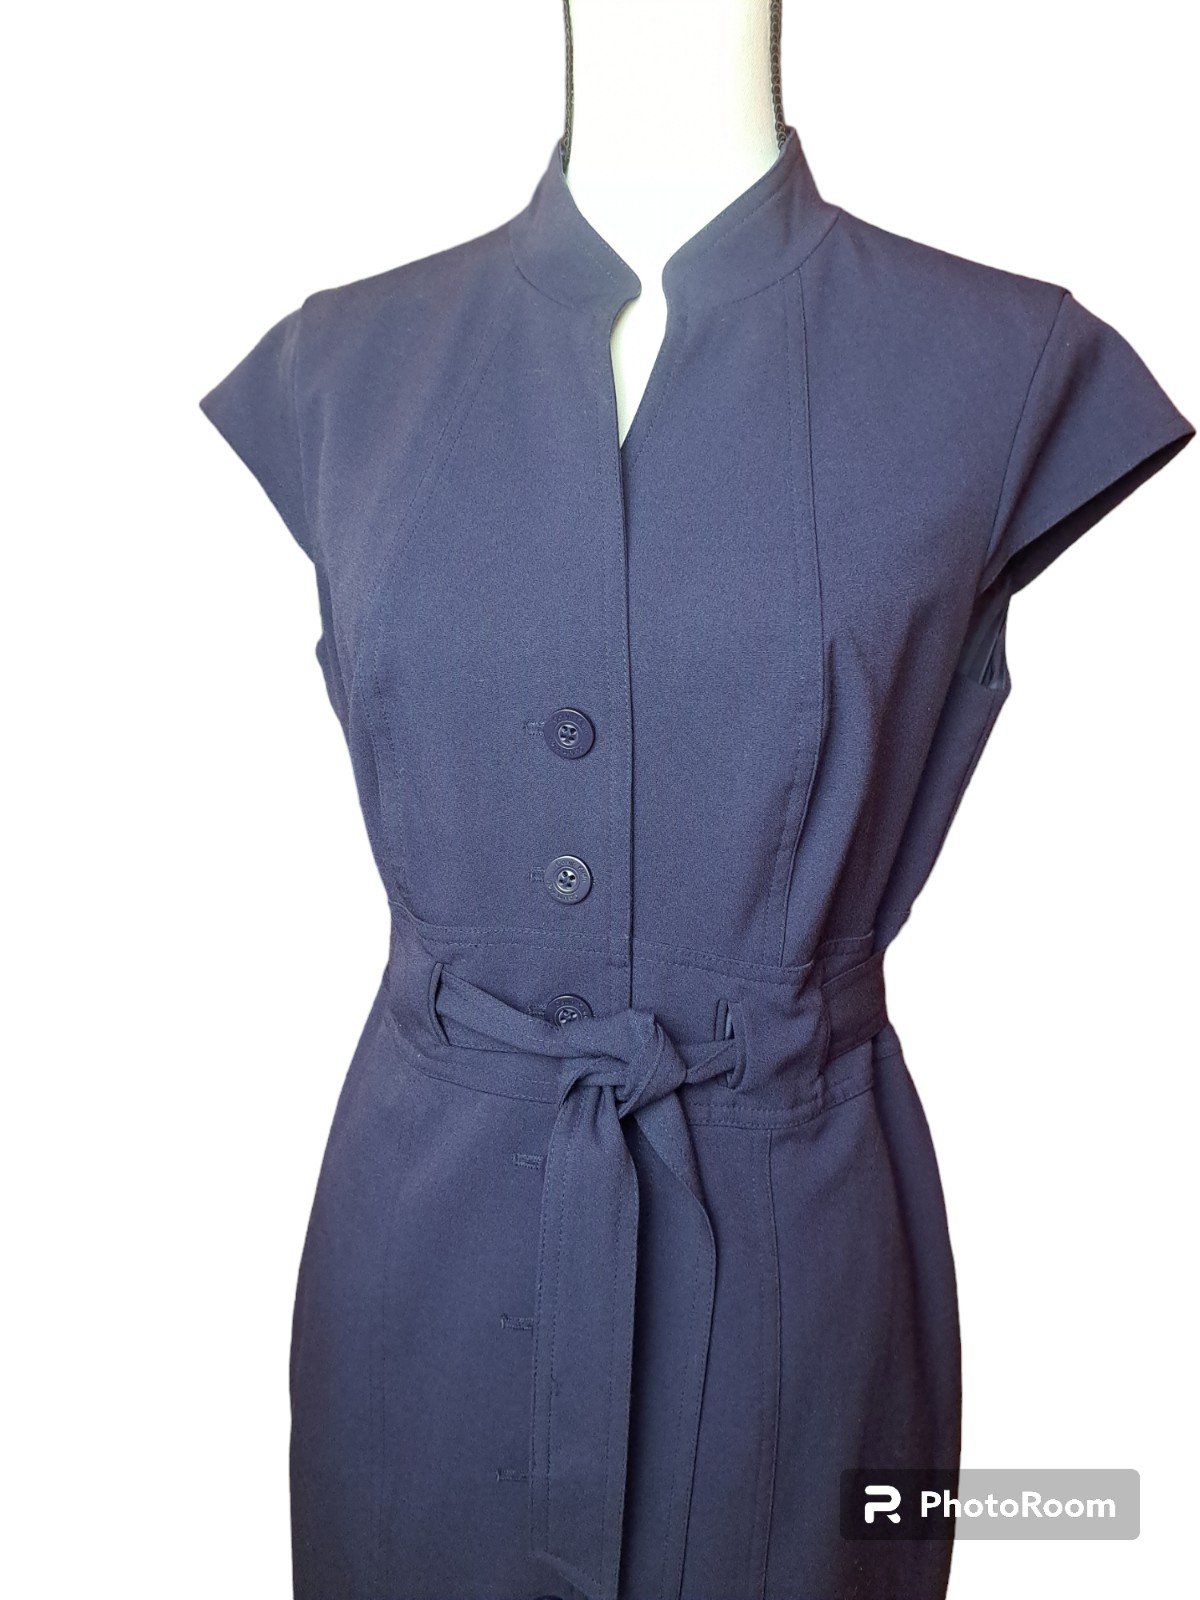 Calvin Klein 10 navy business career dress belted lined navy 68Ify5voW